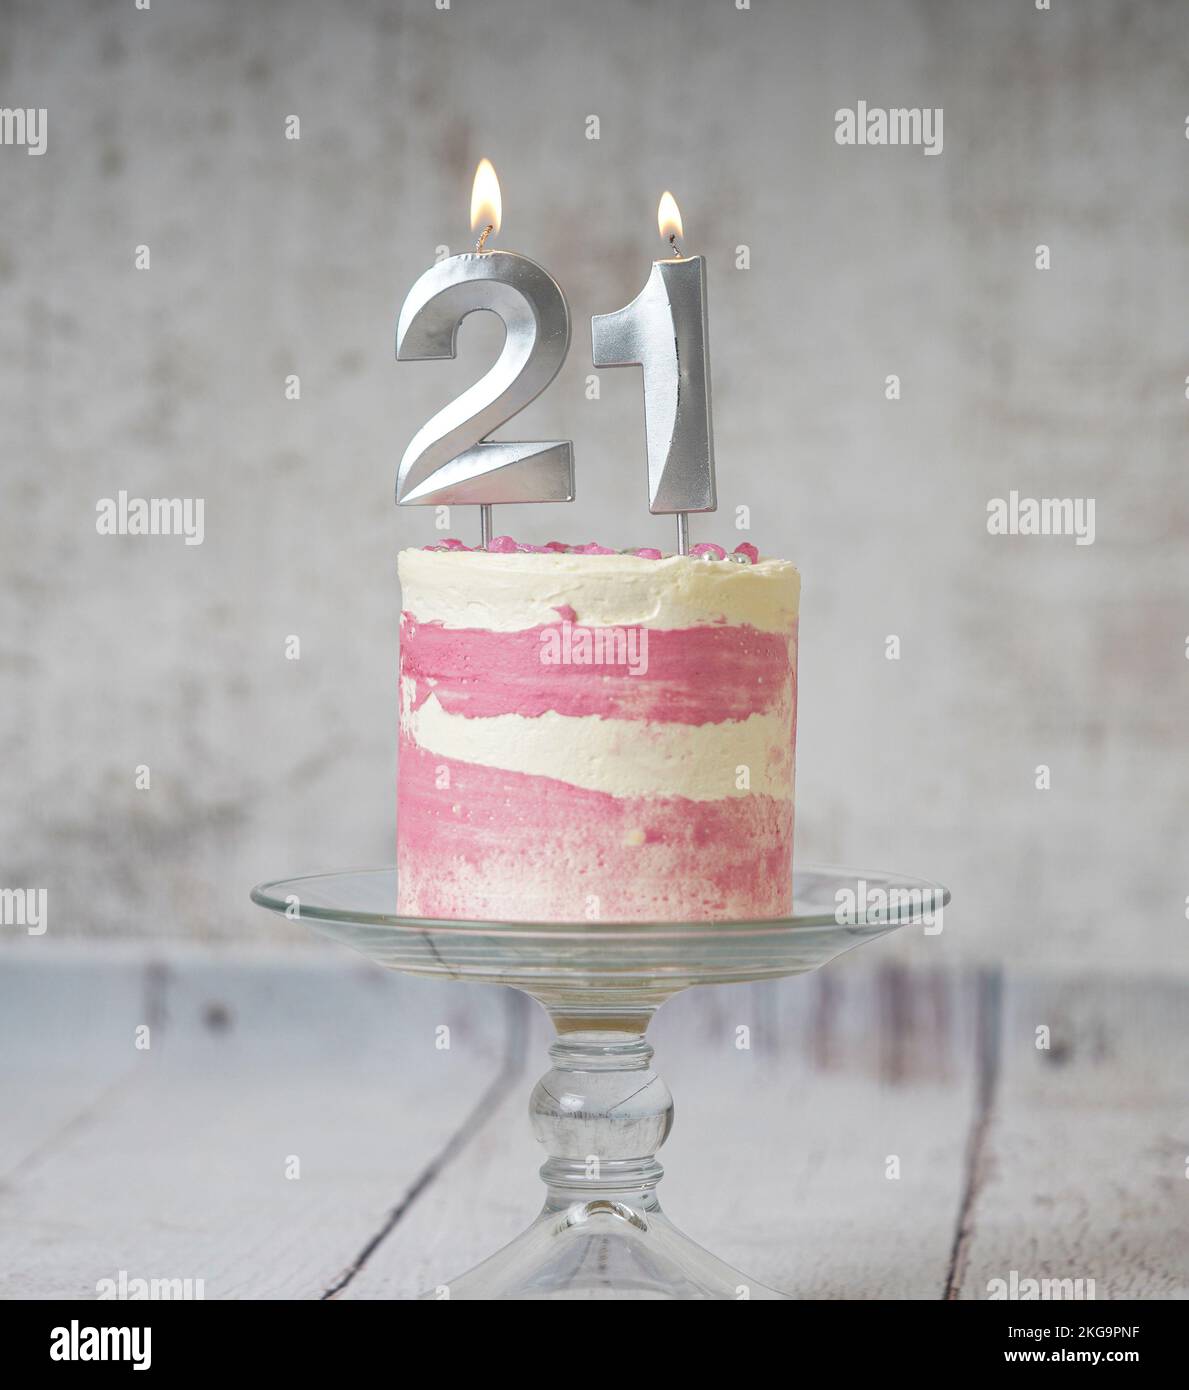 21st Birthday cake pink and silver cake with some sprinkles and 21st candlelight on a white wooden background. Stock Photo